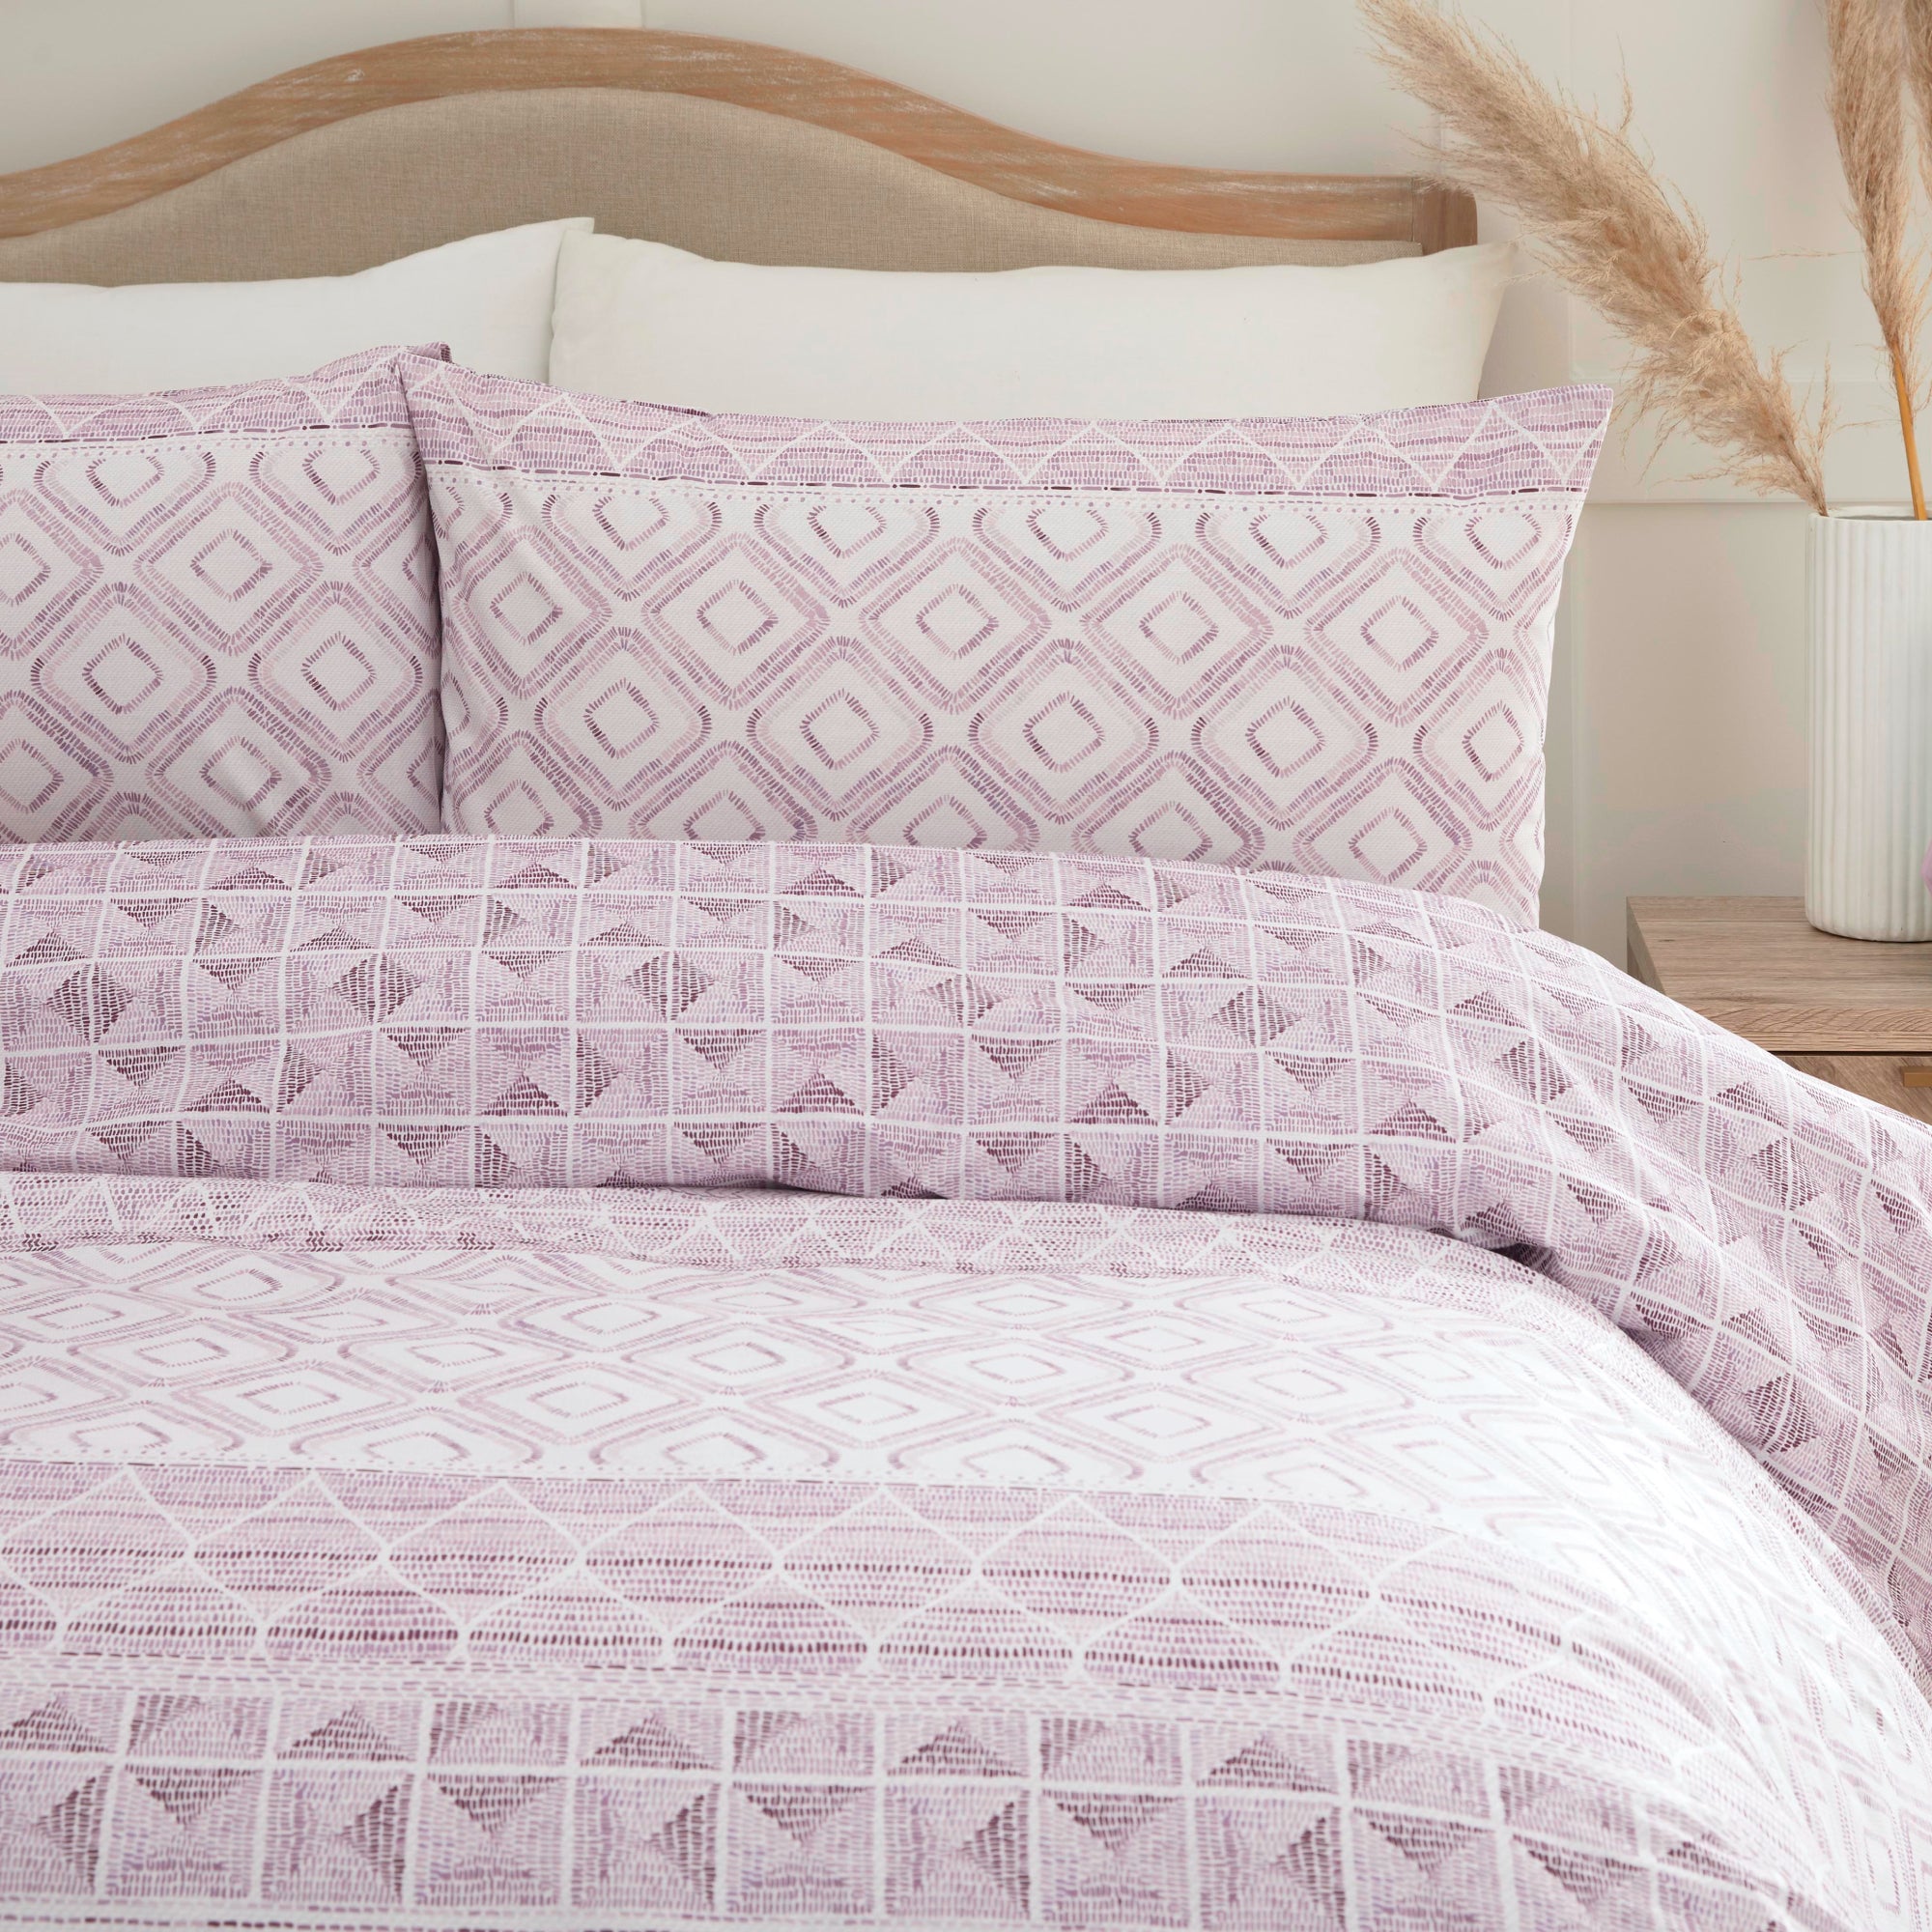 Duvet Cover Set Aden by Dreams And Drapes Design in Plum